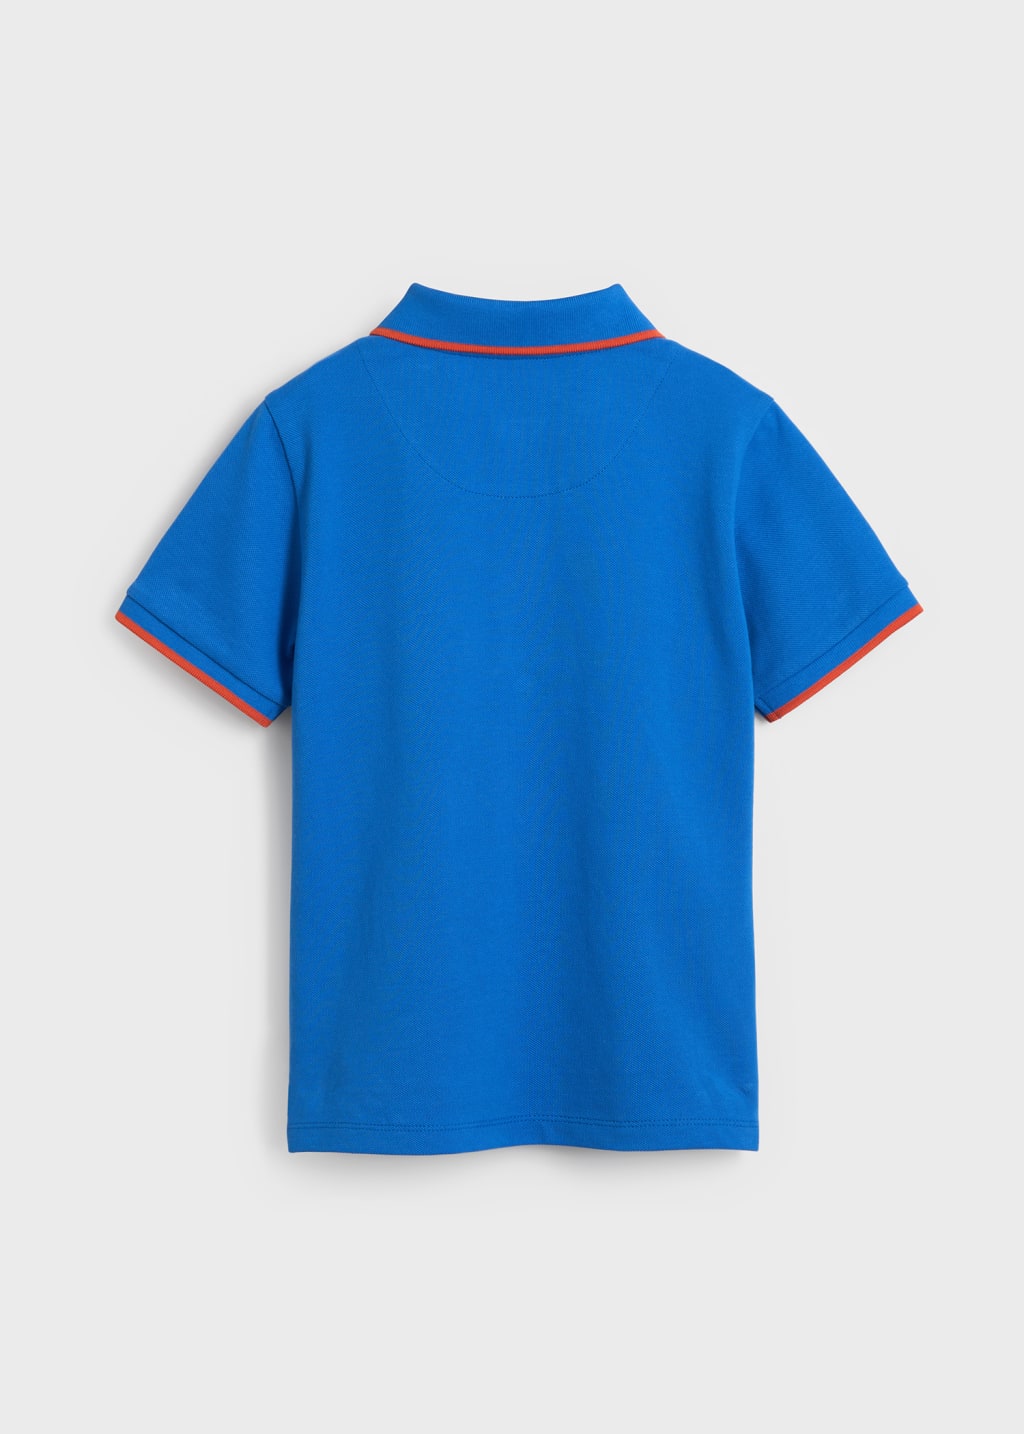 Product view - 2-13 Years Blue Short Sleeve Signature Polo Shirt Paul Smith